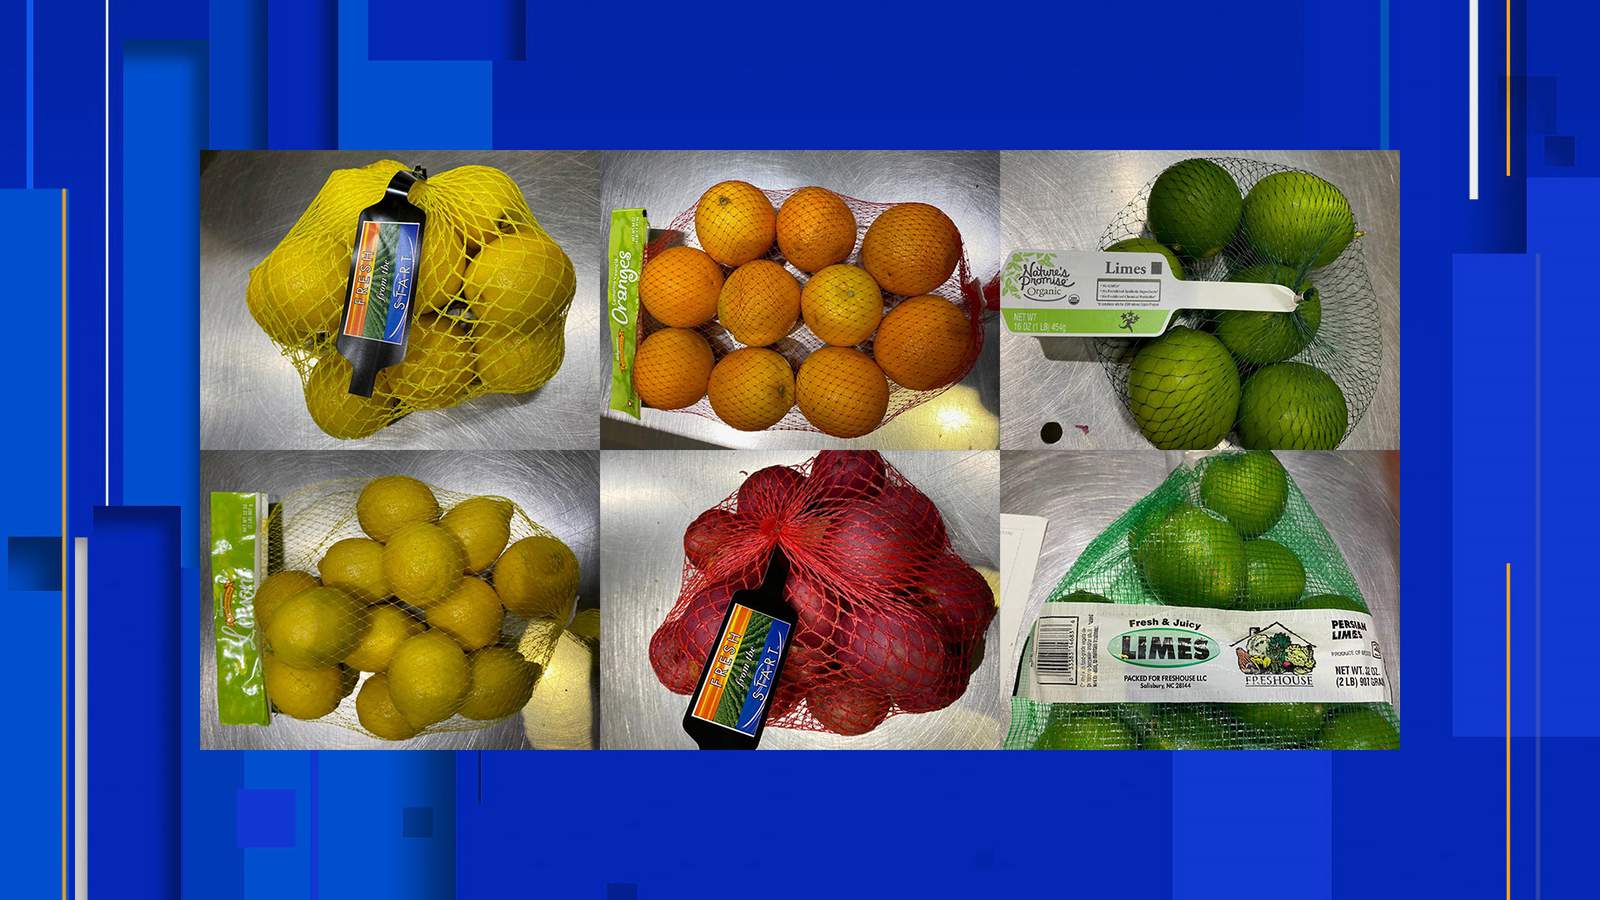 Limes, oranges, lemons and red potatoes recalled over potential listeria concerns